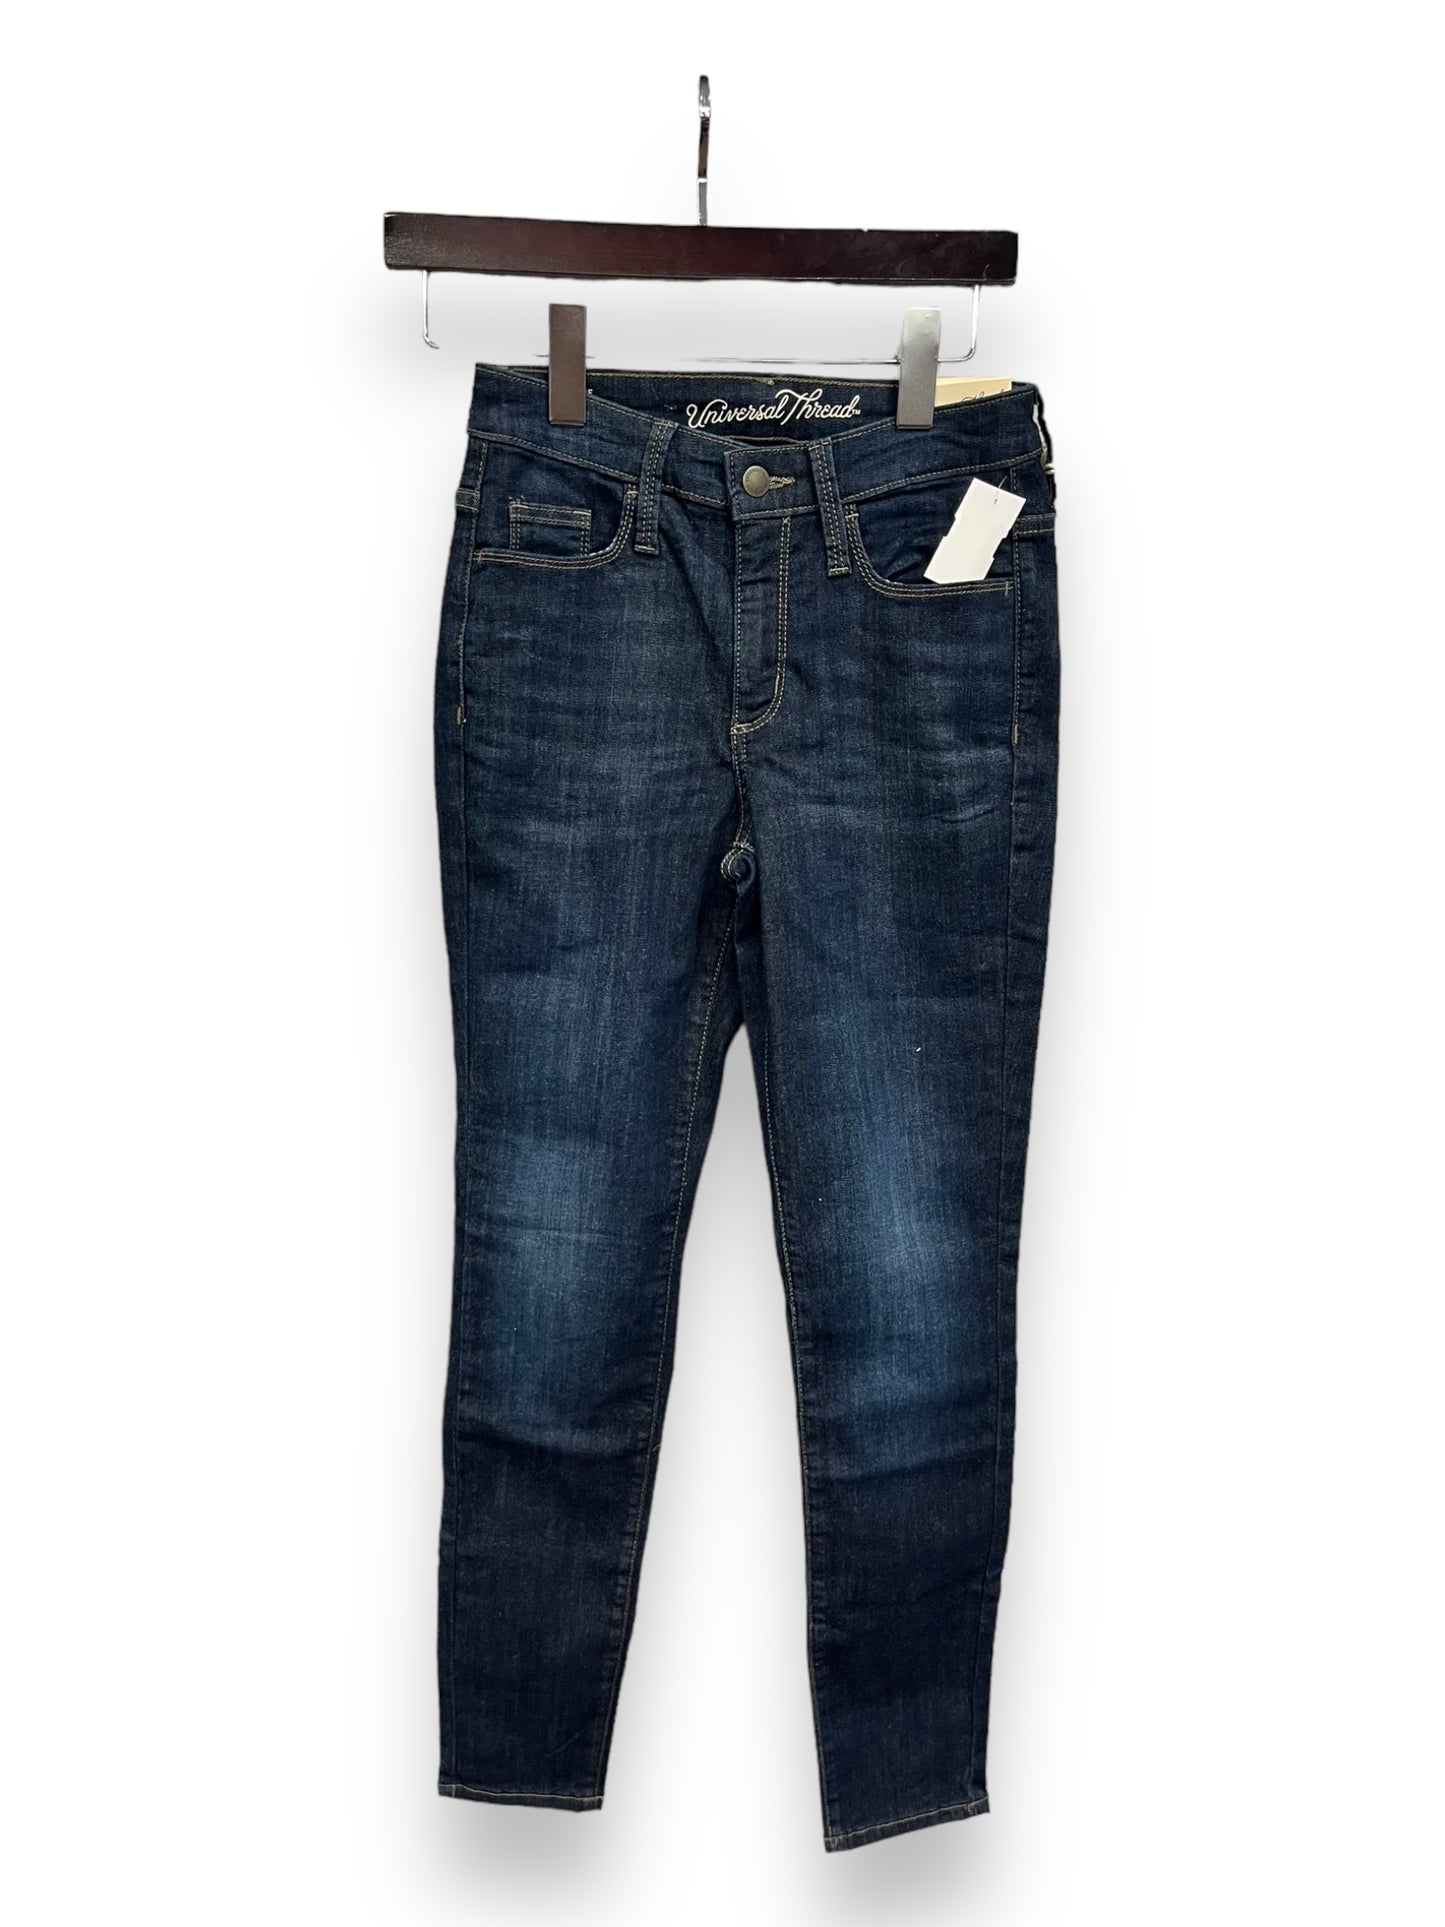 Jeans Skinny By Universal Thread  Size: 0